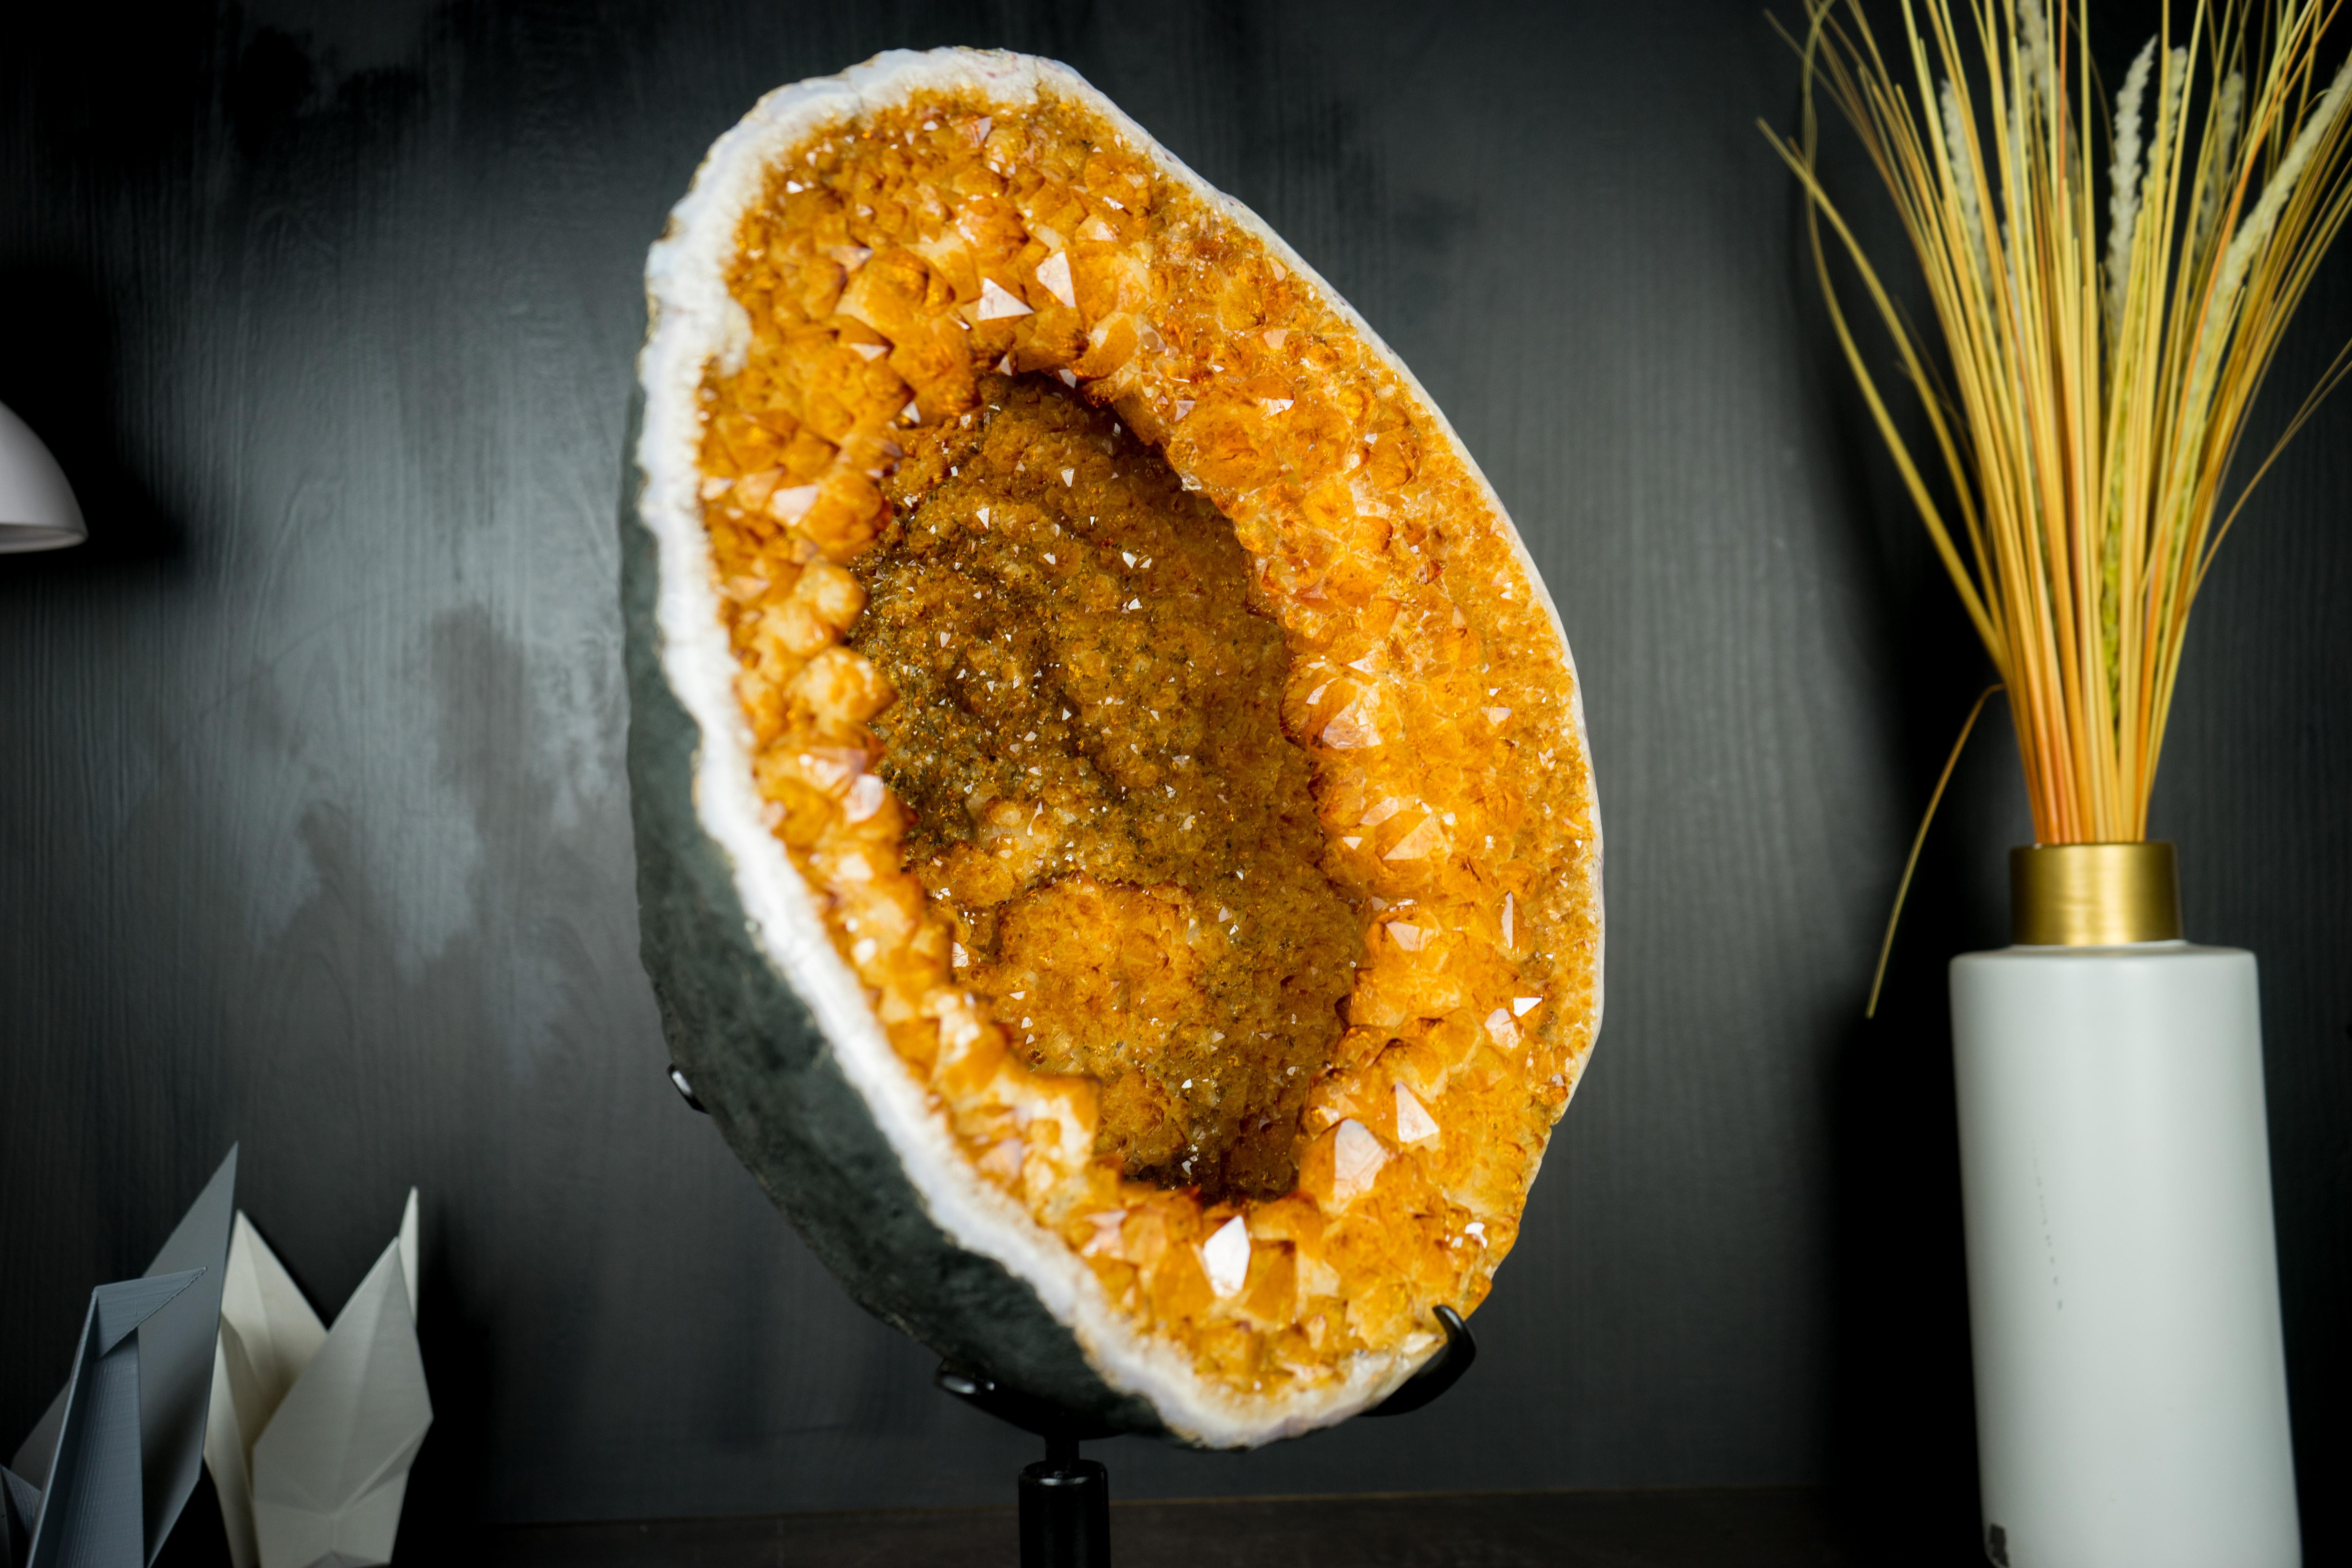 A Lifetime Find: Gallery-Grade Citrine Geode with a Rare Citrine Crown and Stalactite Flower Formations

▫️ Description

Elegantly formed and exhibiting rare characteristics, this citrine geode features a crown composed of large, perfectly formed